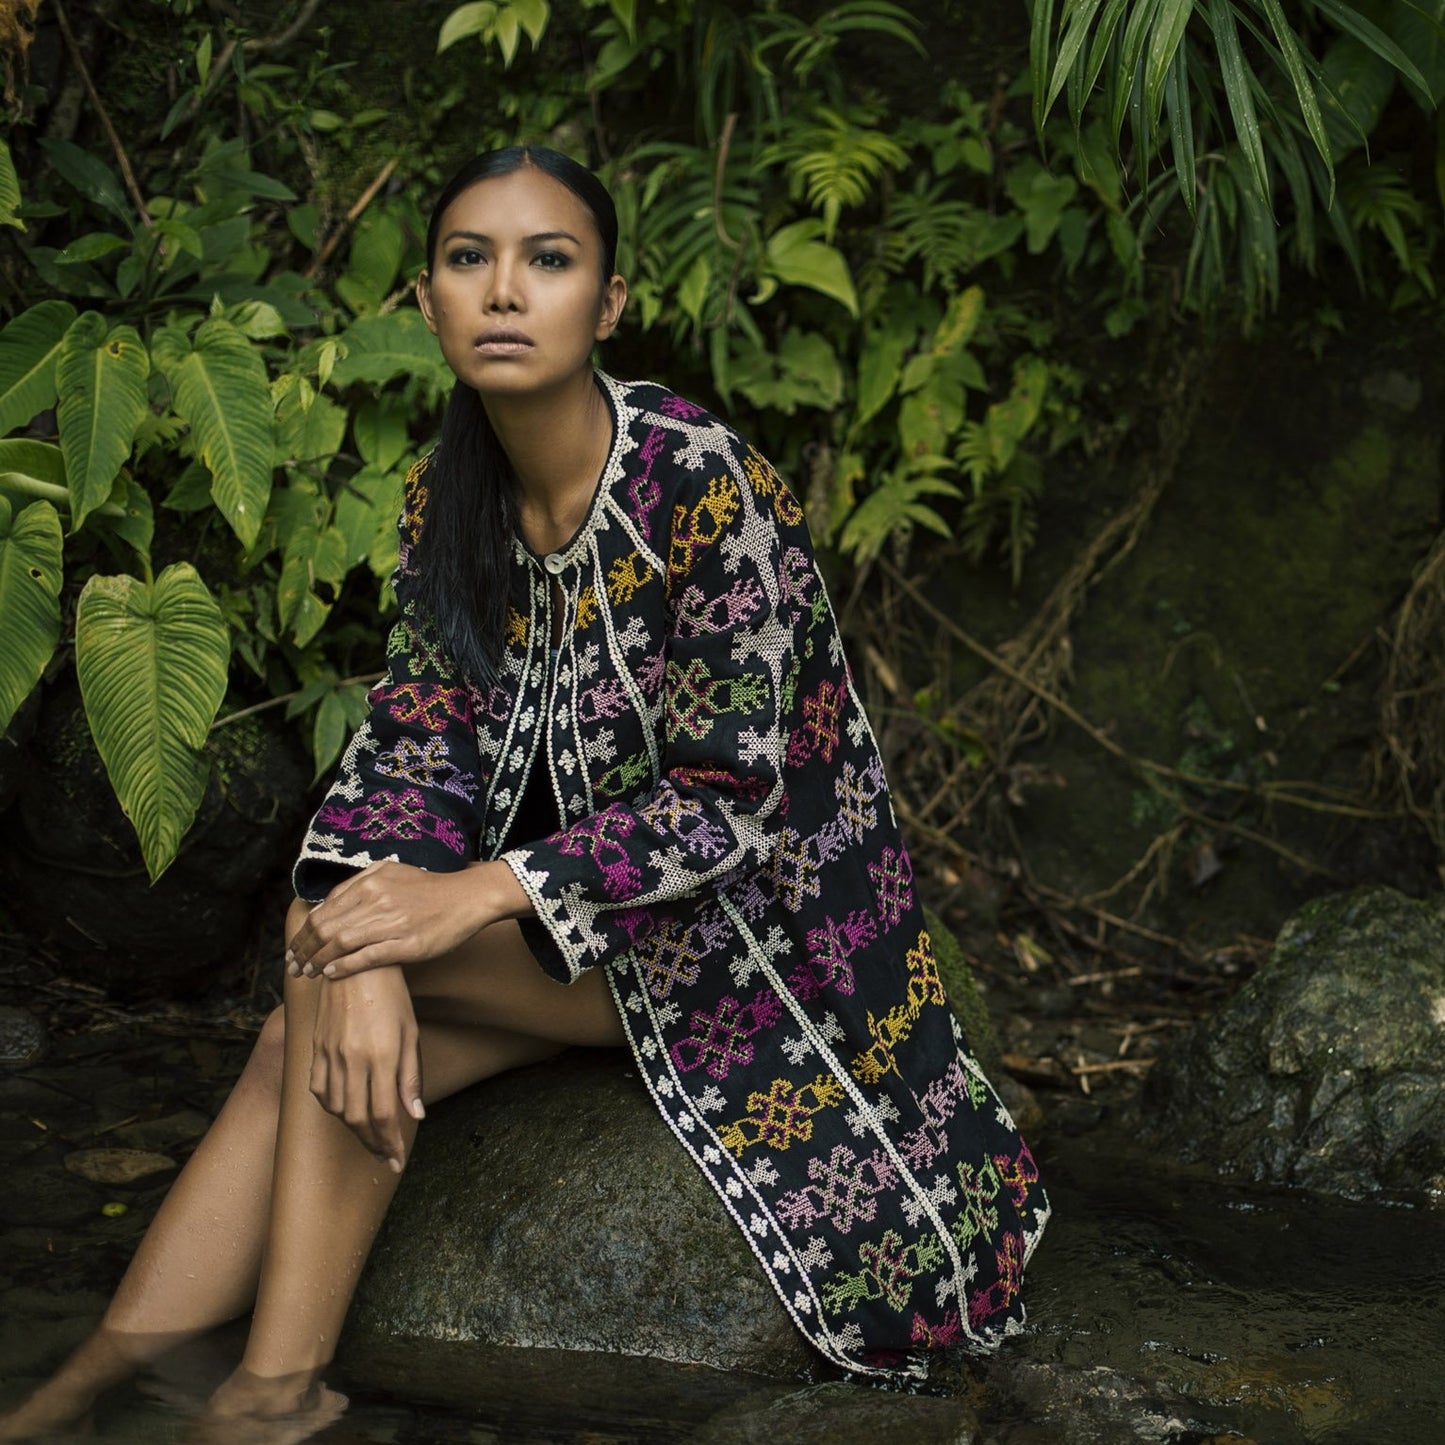 Philippines, Filip + Inna, Weaving & Embroidery